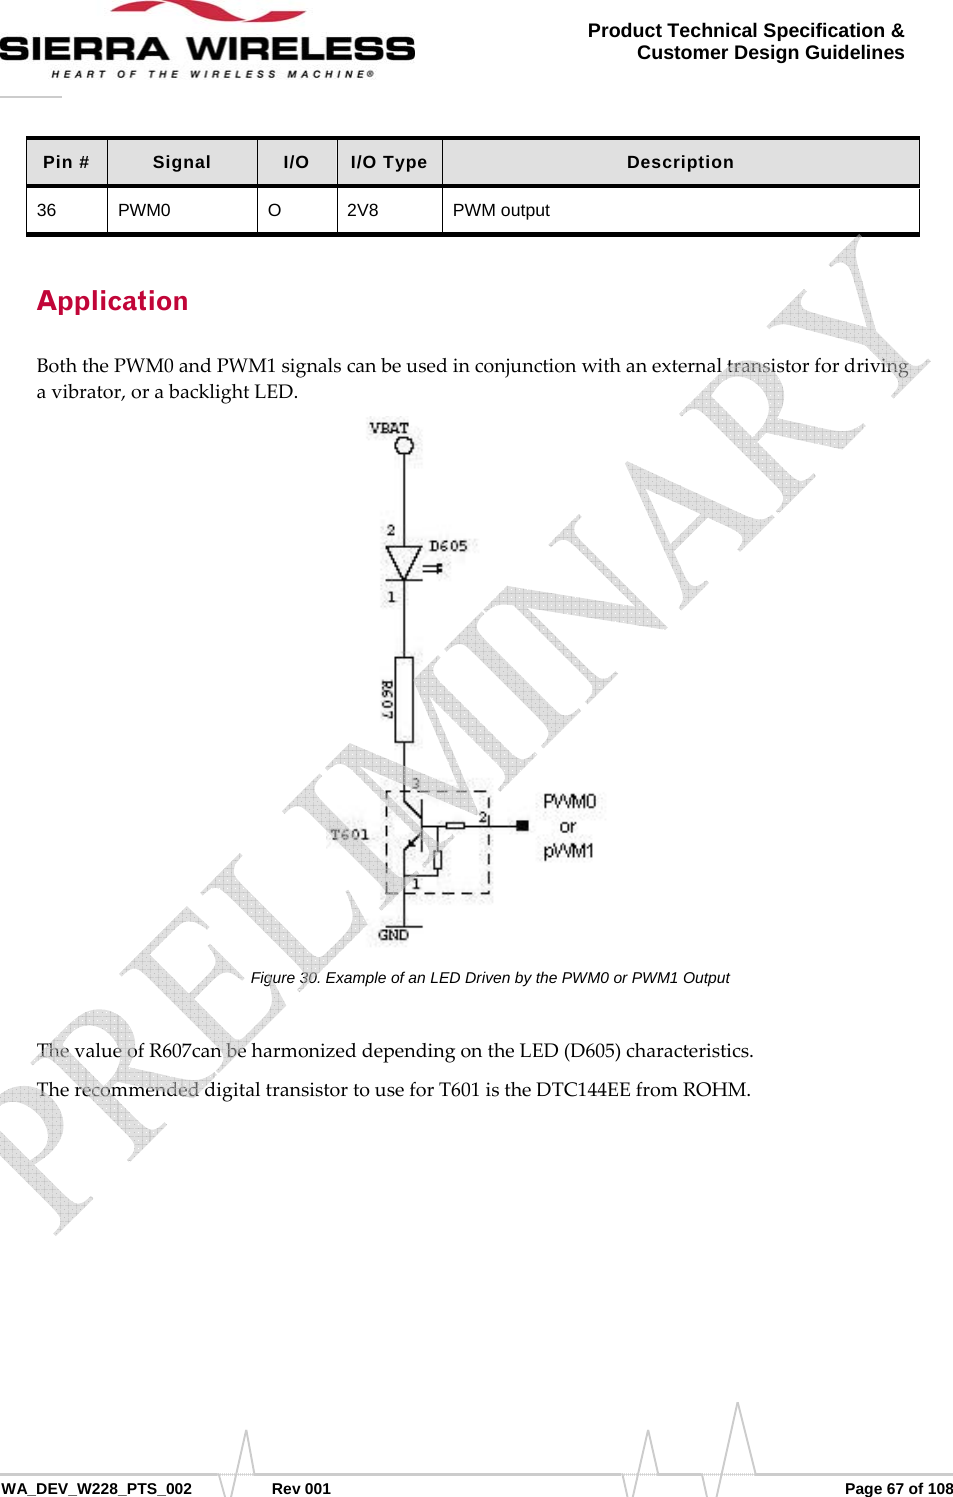      WA_DEV_W228_PTS_002 Rev 001  Page 67 of 108 Product Technical Specification &amp; Customer Design Guidelines Pin #  Signal  I/O  I/O Type  Description 36 PWM0  O  2V8  PWM output Application BoththePWM0andPWM1signalscanbeusedinconjunctionwithanexternaltransistorfordrivingavibrator,orabacklightLED.Figure 30. Example of an LED Driven by the PWM0 or PWM1 Output ThevalueofR607canbeharmonizeddependingontheLED(D605)characteristics.TherecommendeddigitaltransistortouseforT601istheDTC144EEfromROHM.   